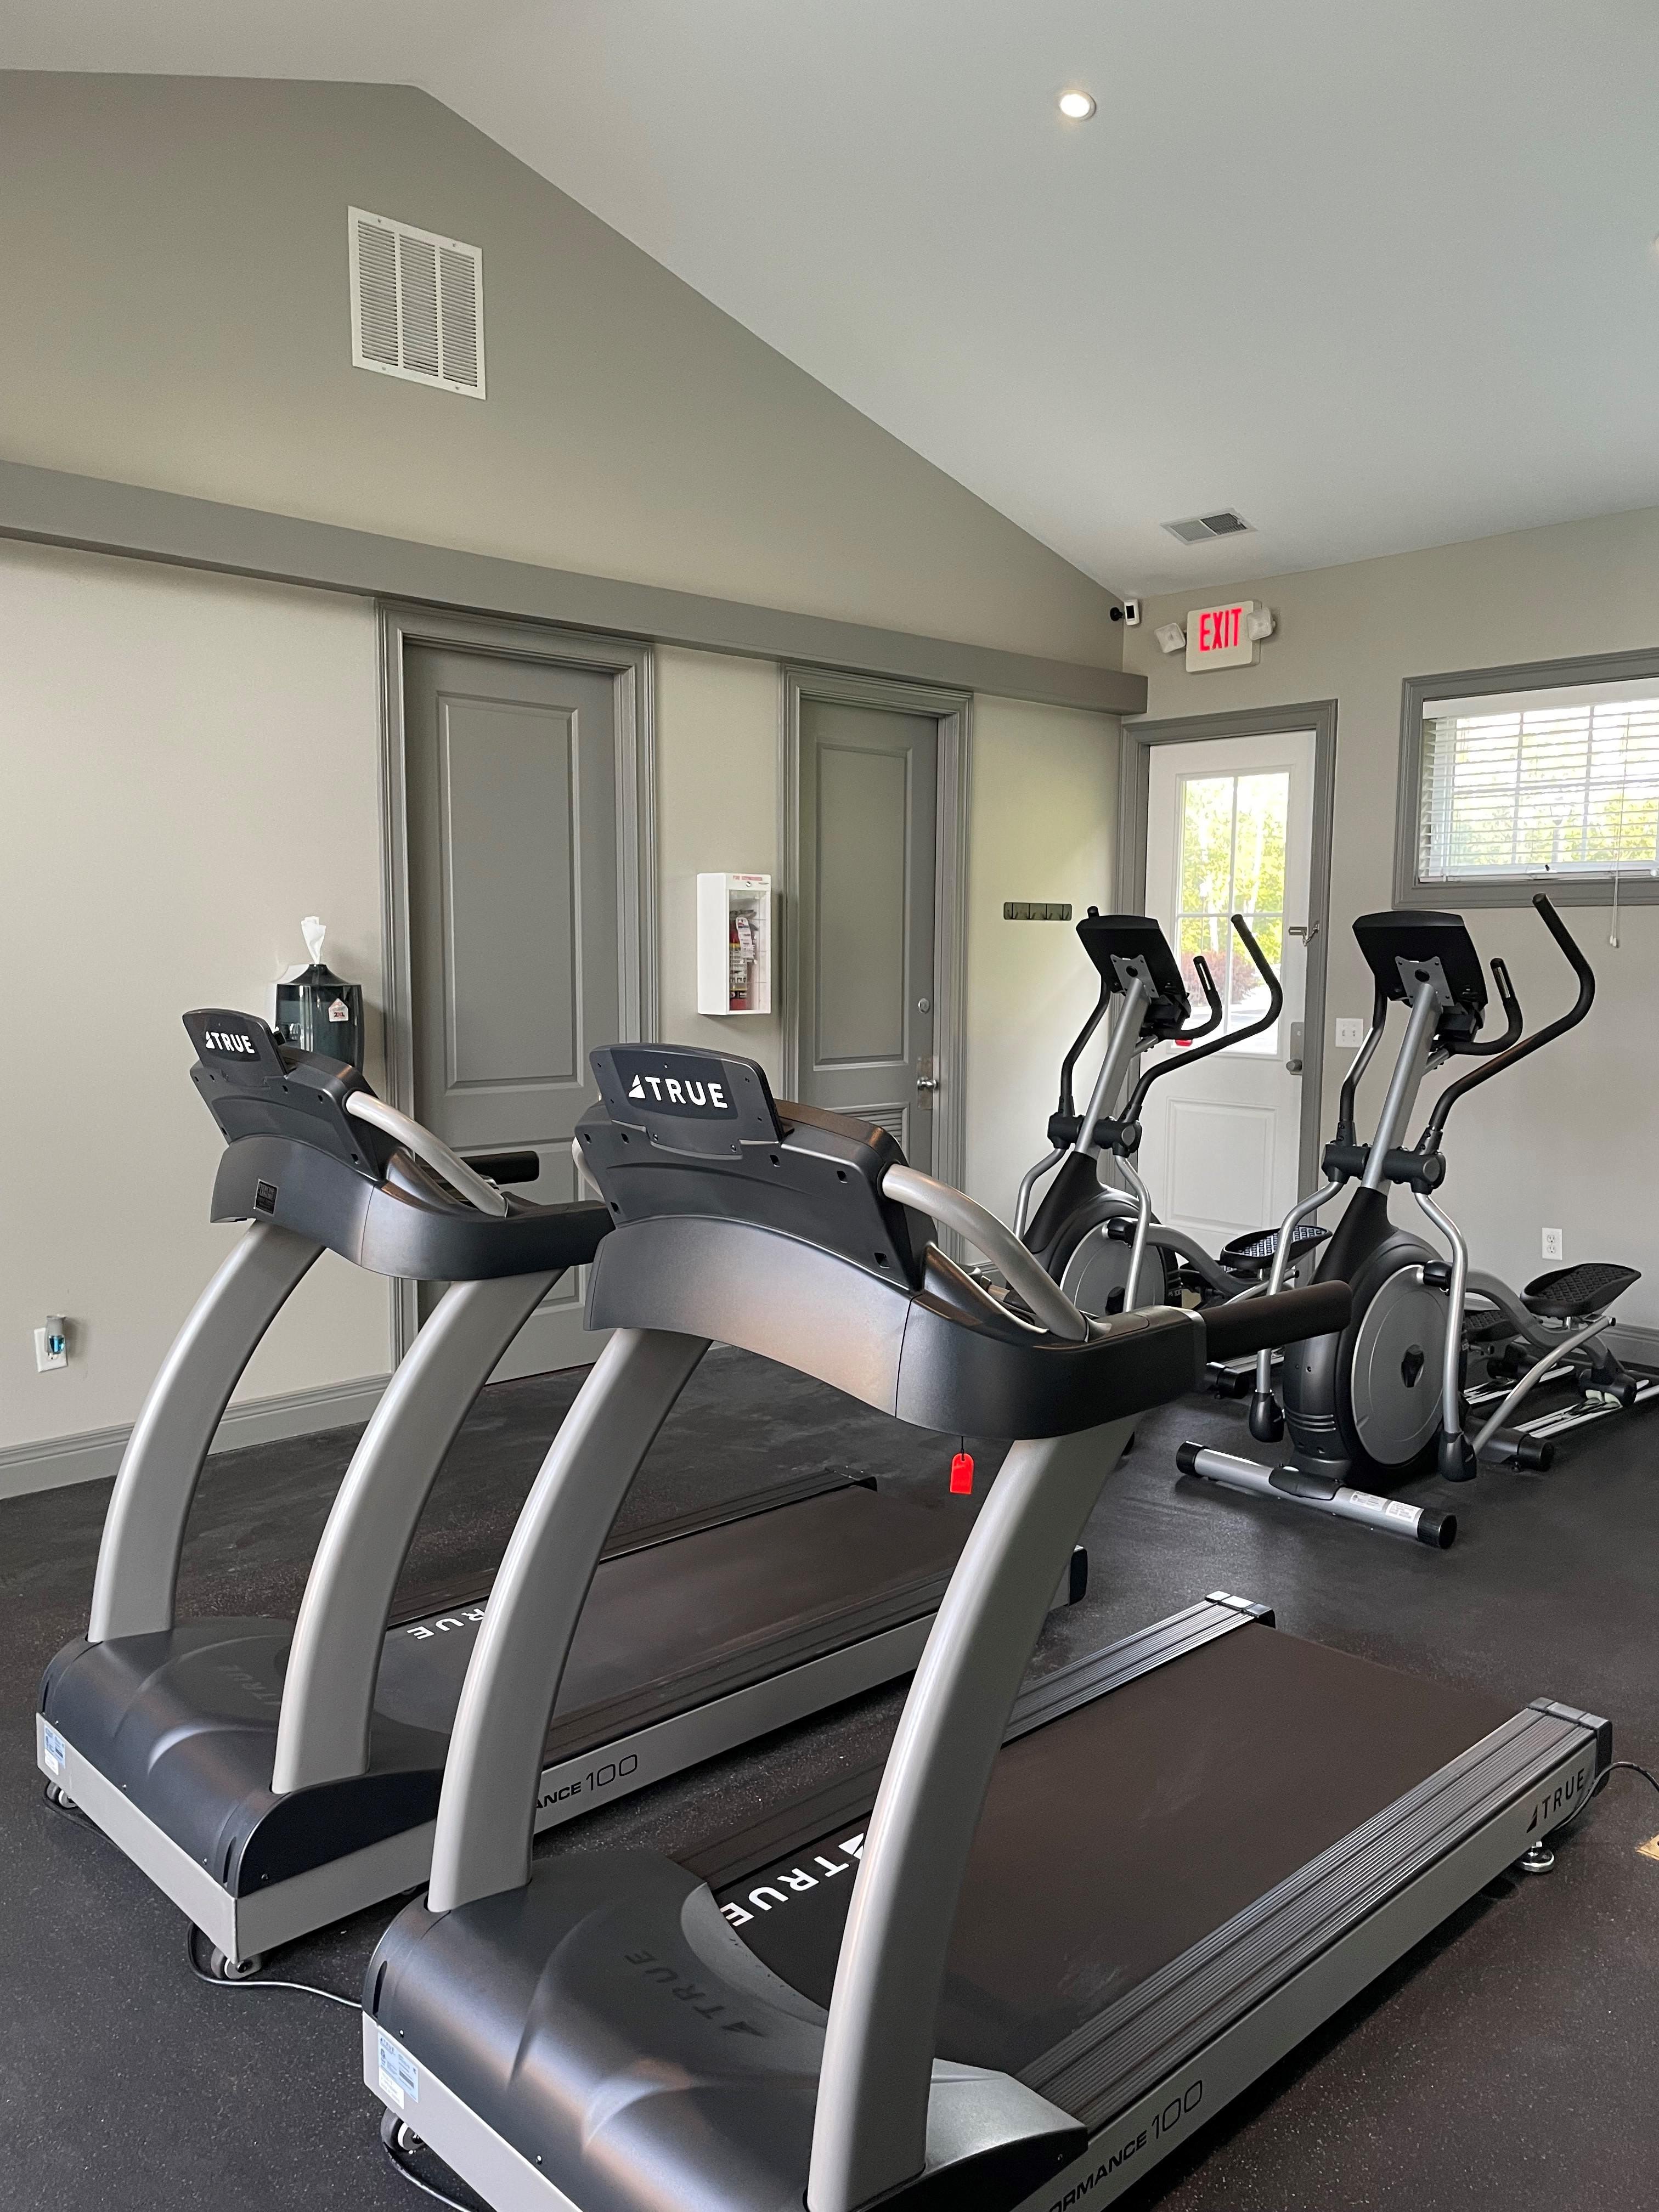 Water's Bend Apartment Fitness Center